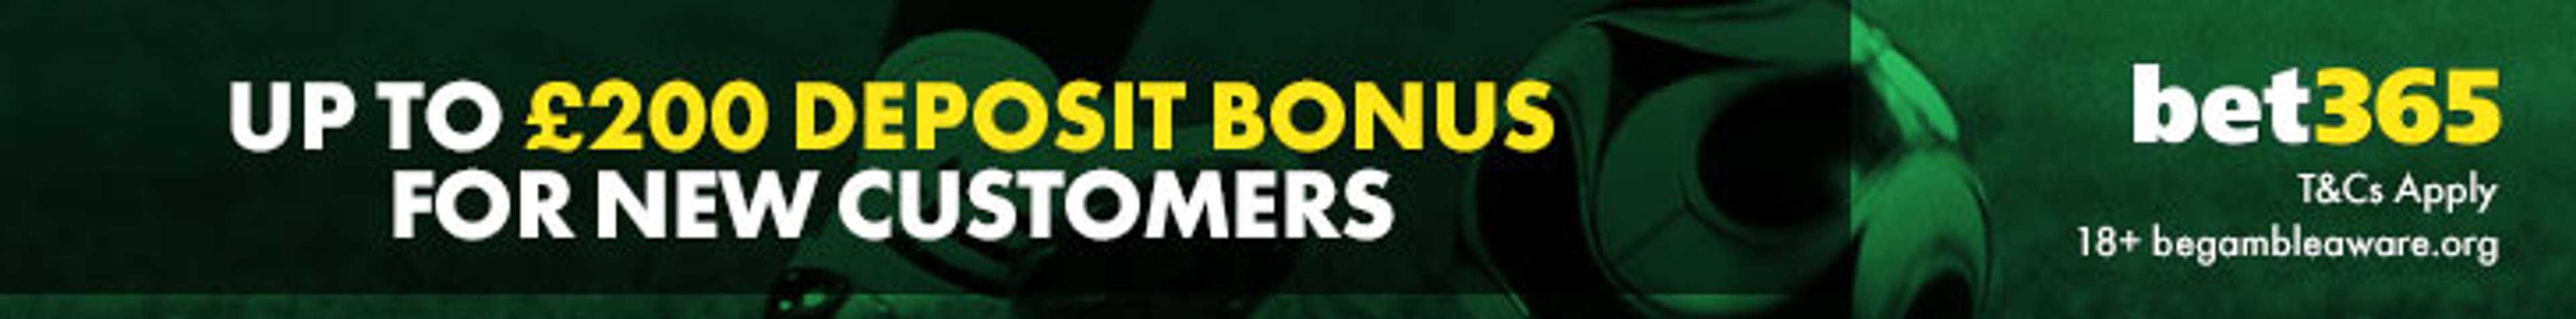 bet365 new footer banner